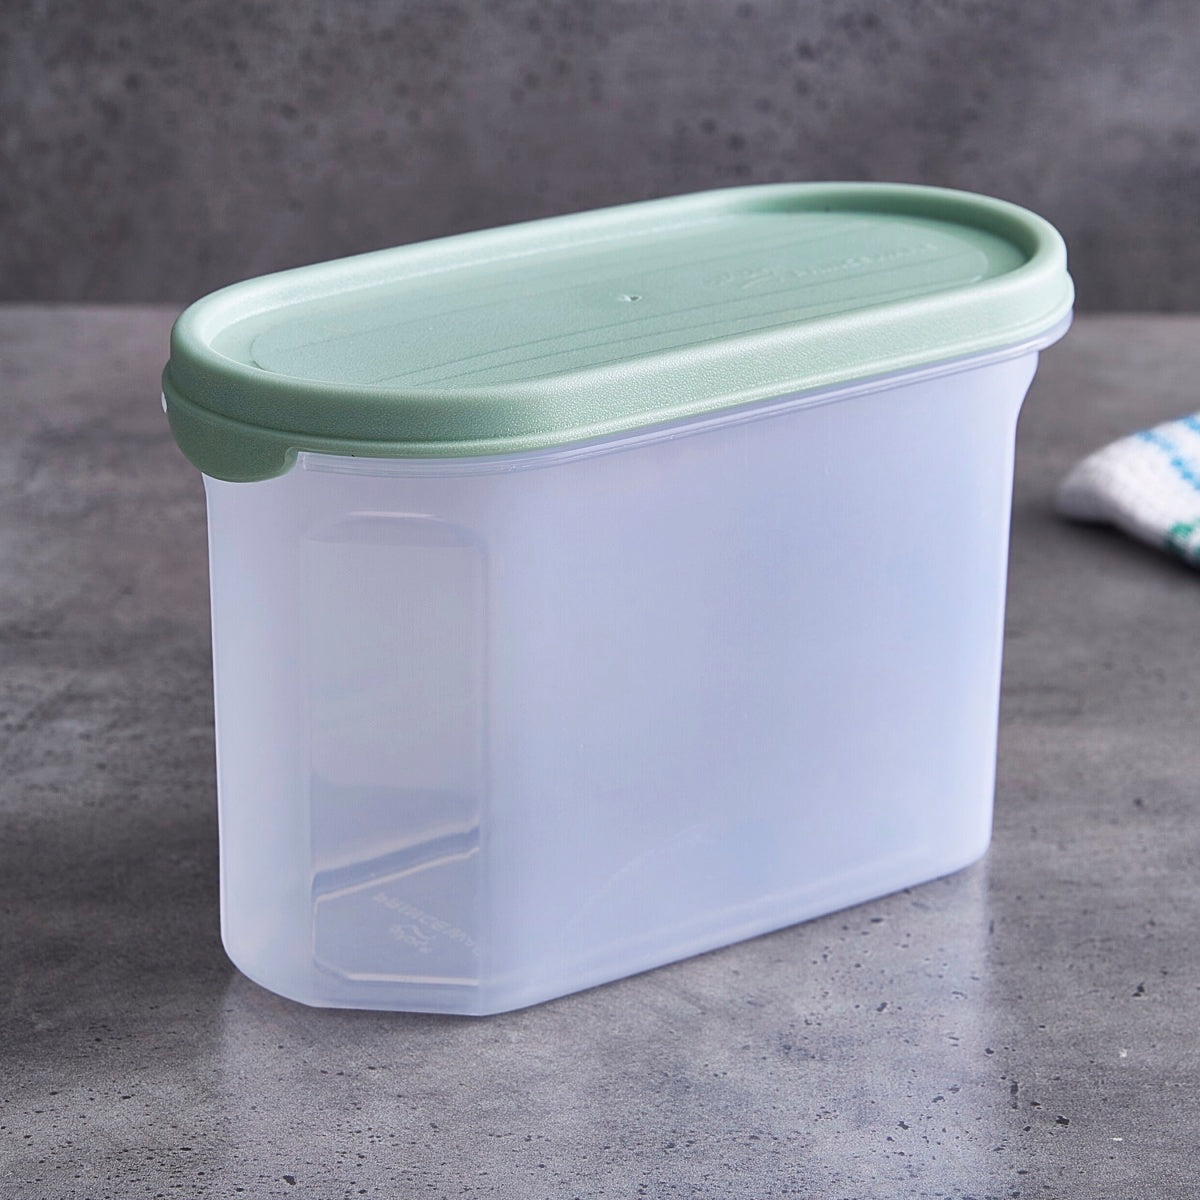 Easy Store Oval Container - 1.2 L